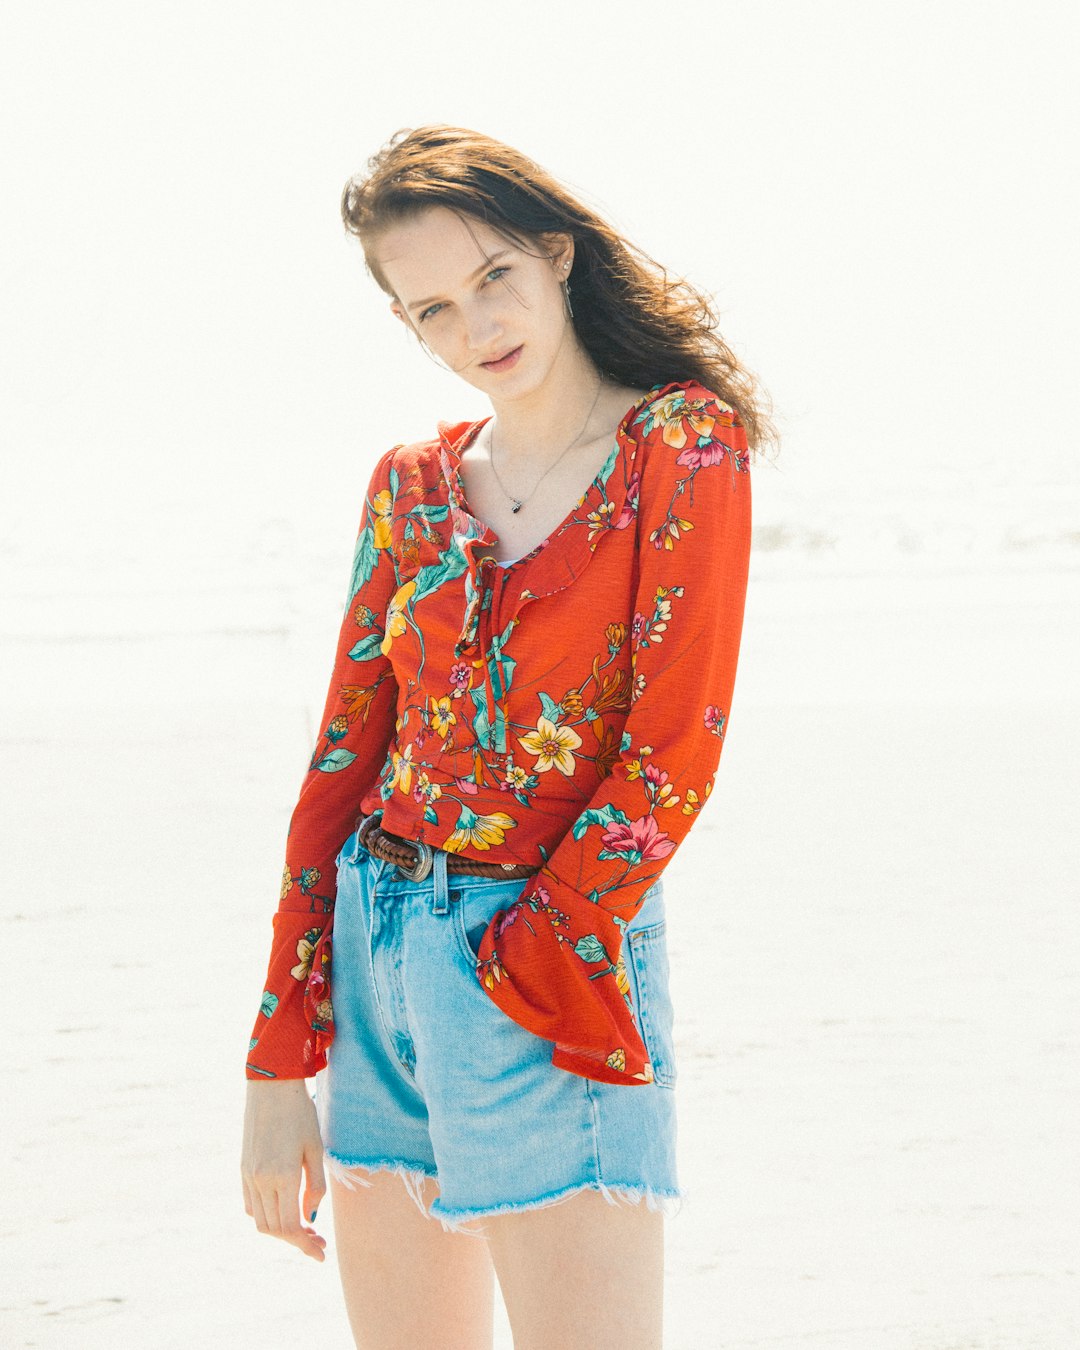 woman in red and blue floral long sleeve shirt standing on white sand during daytime